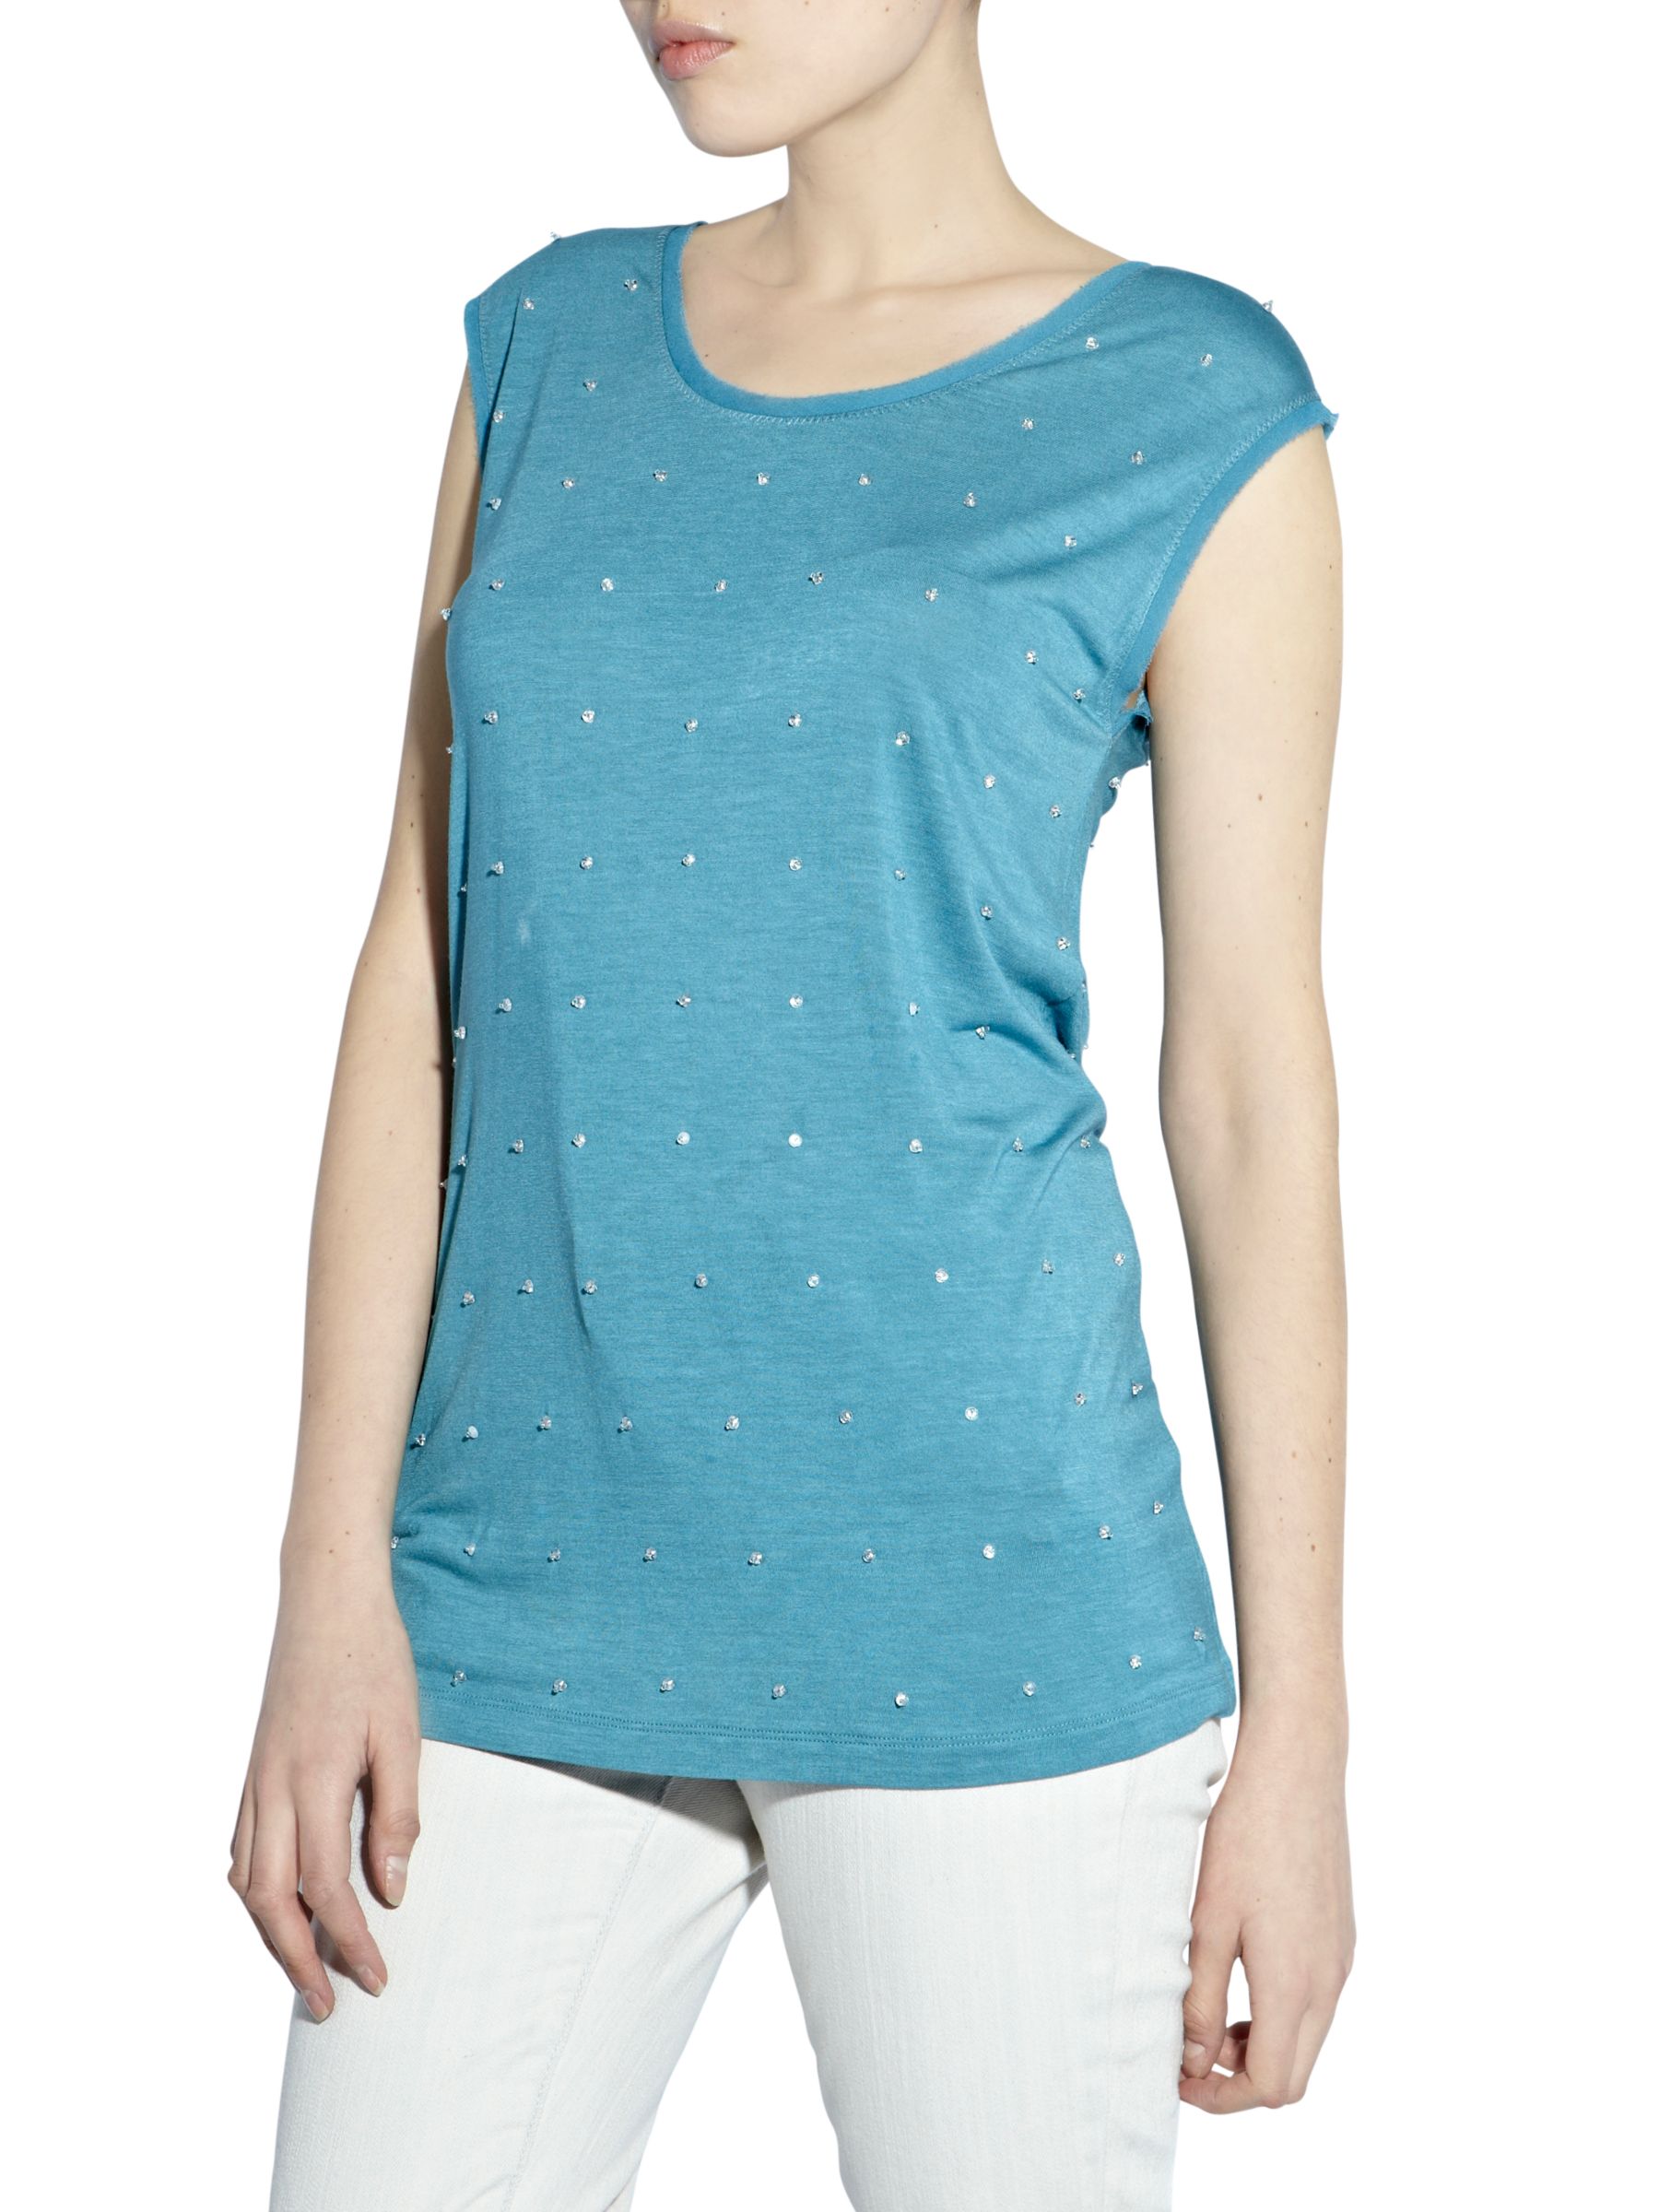 All Over Gem T-Shirt, Turquoise